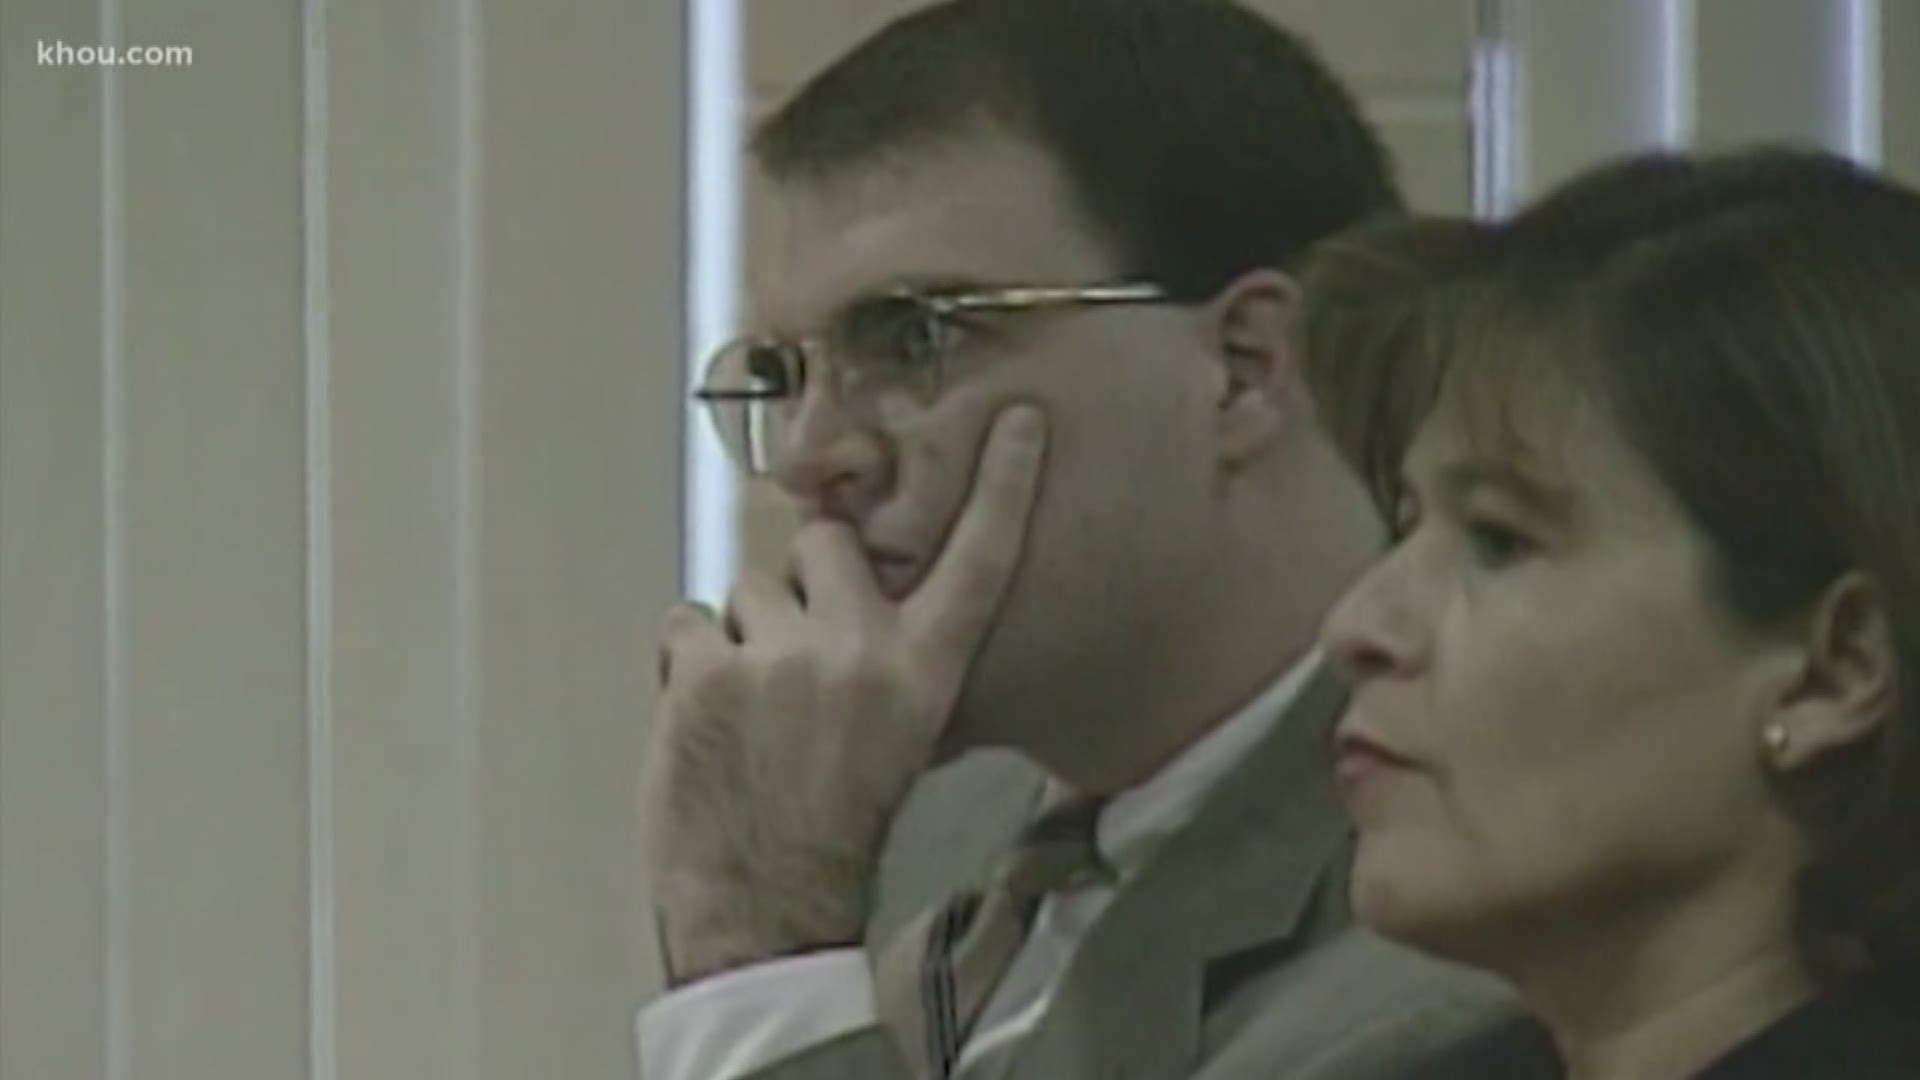 Larry Swearingen was sentenced to death for killing Melissa Trotter, who was found dead in the Sam Houston National Forest in January 1999. He is set to die Aug. 21, 2019 - the sixth scheduled execution for him. KHOU 11's Grace White reports.